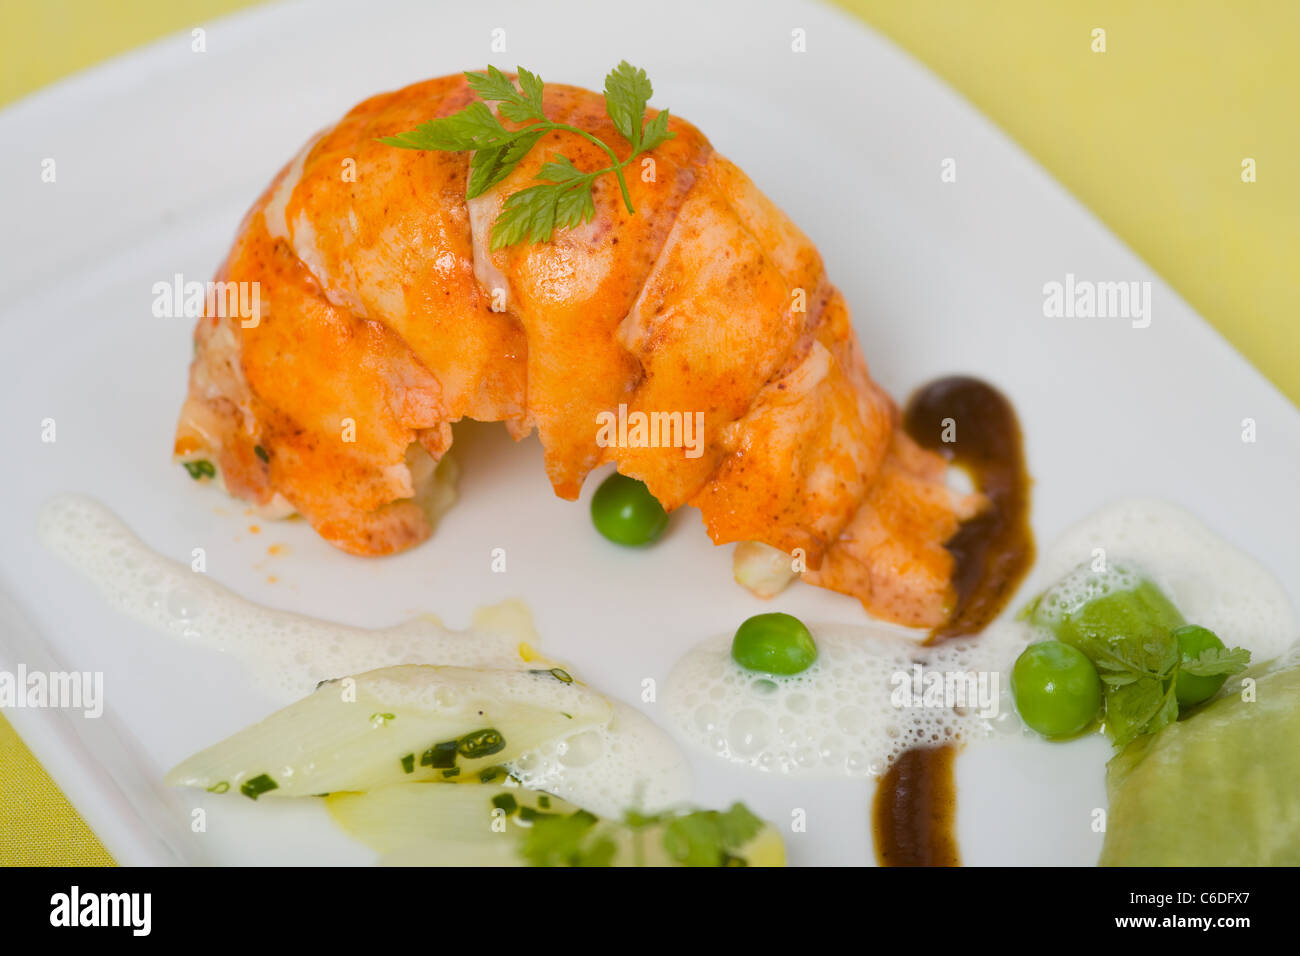 Canadian lobster with a variation of mushy peas and asparagus and chive salad Stock Photo